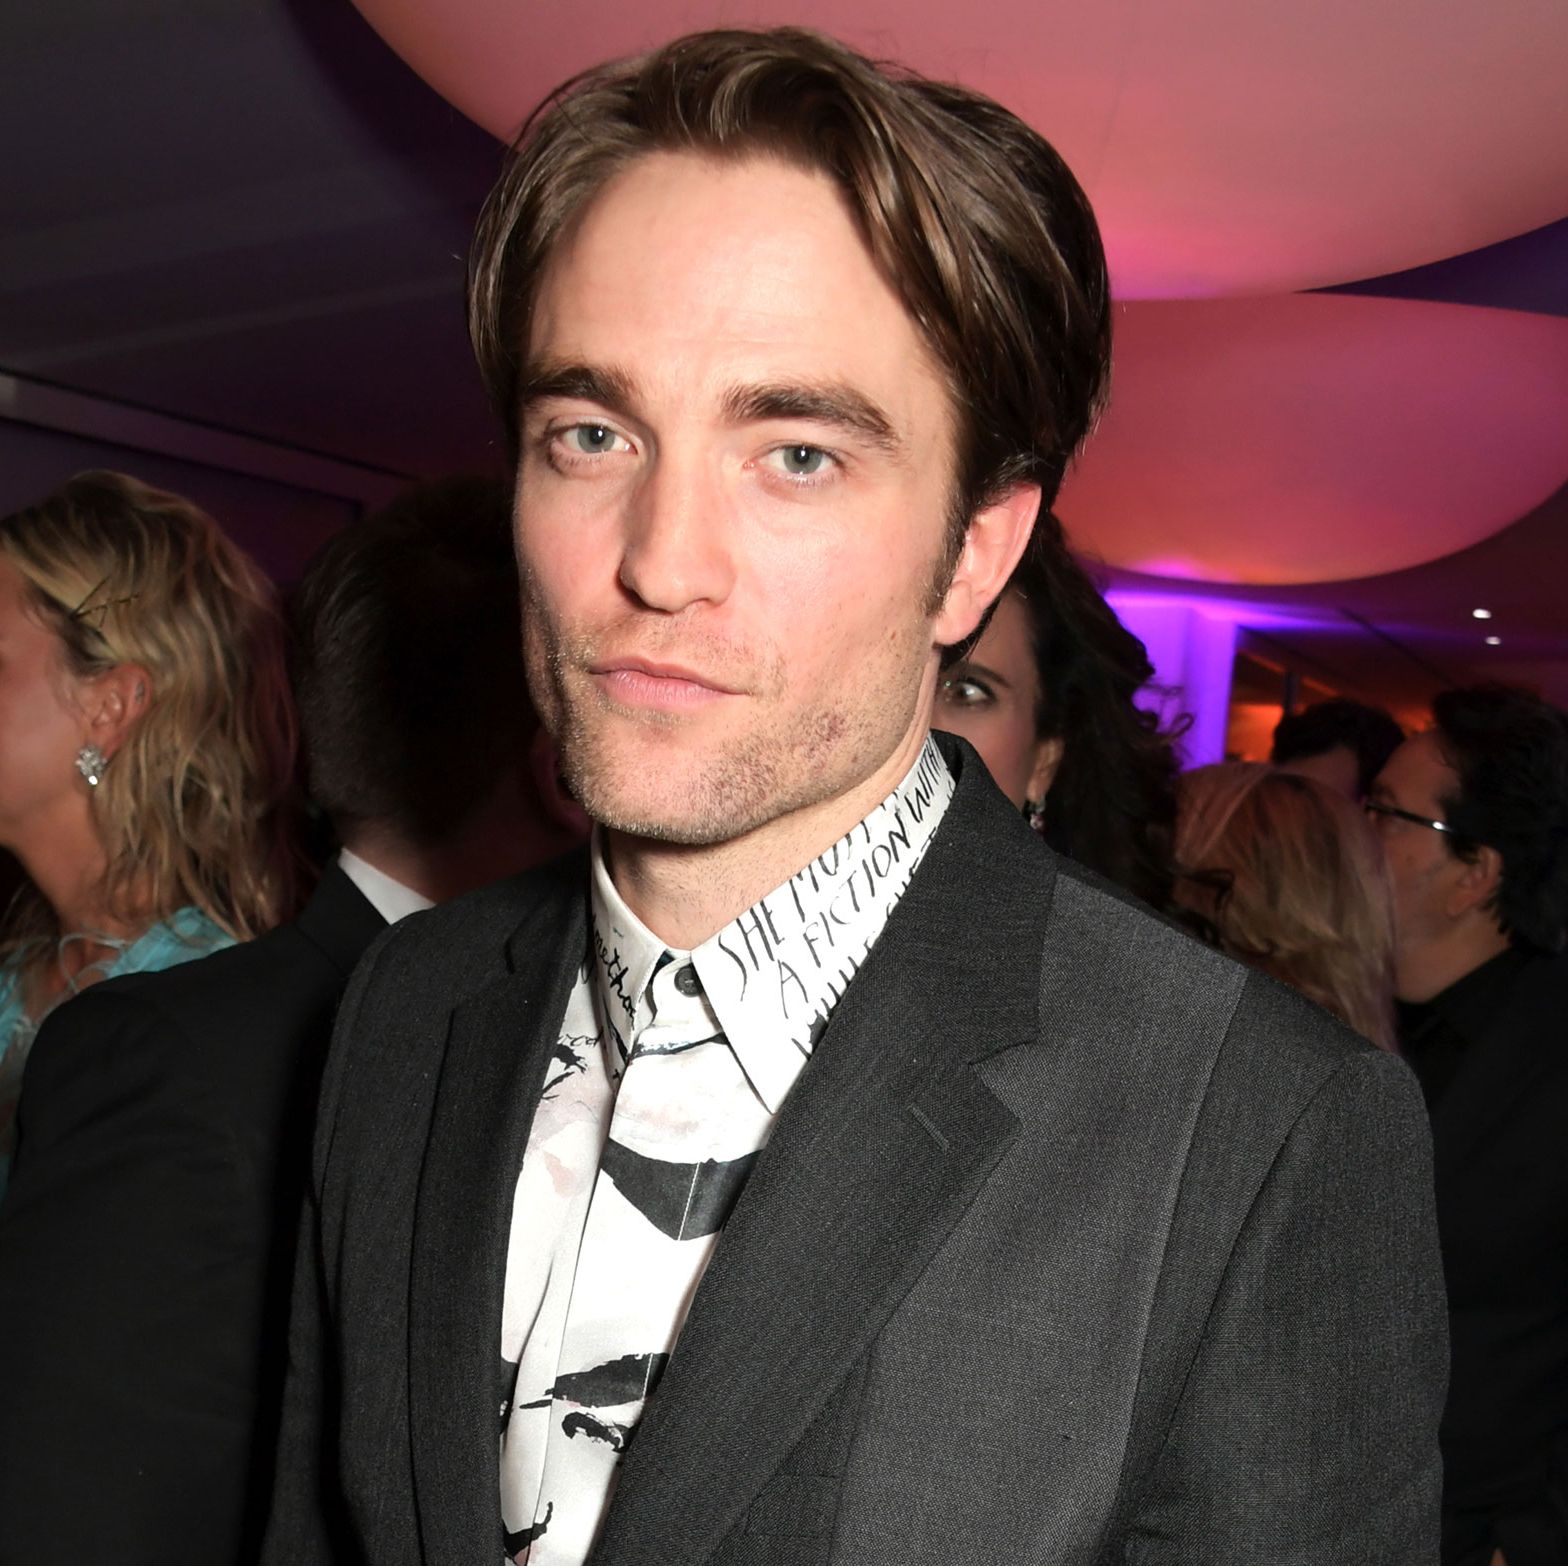 Robert Pattinson pictured in May 2019